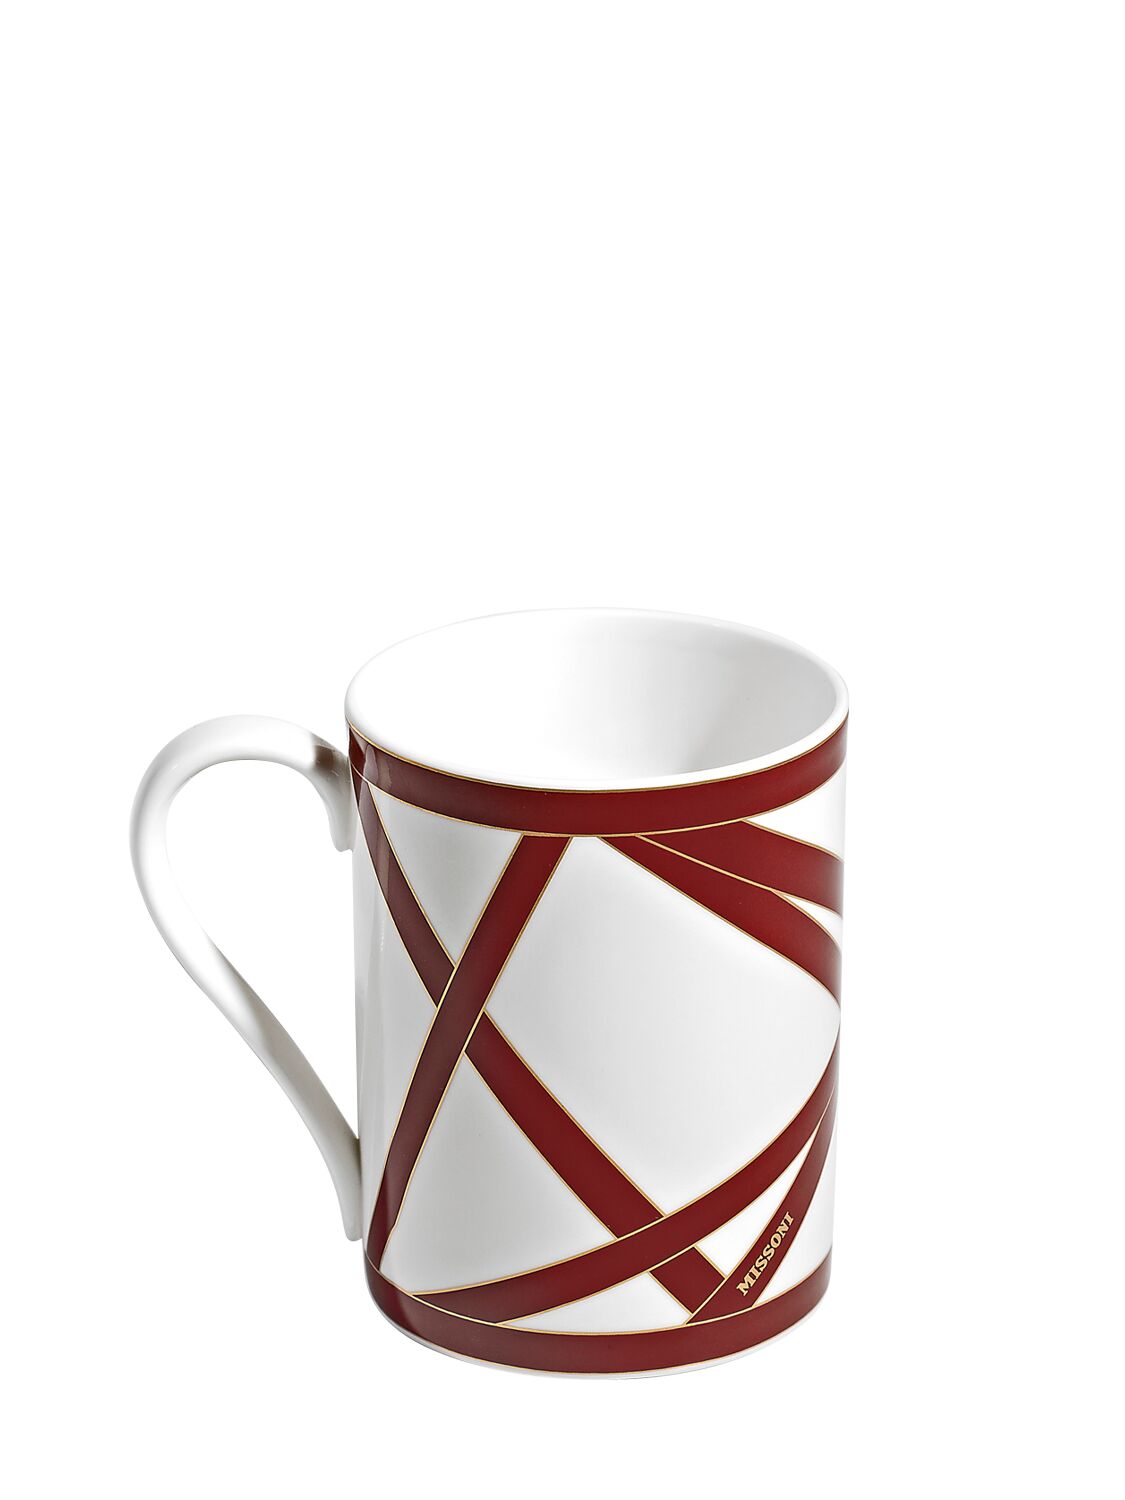 Missoni Home Collection Nastri Bordeaux Mug In Red